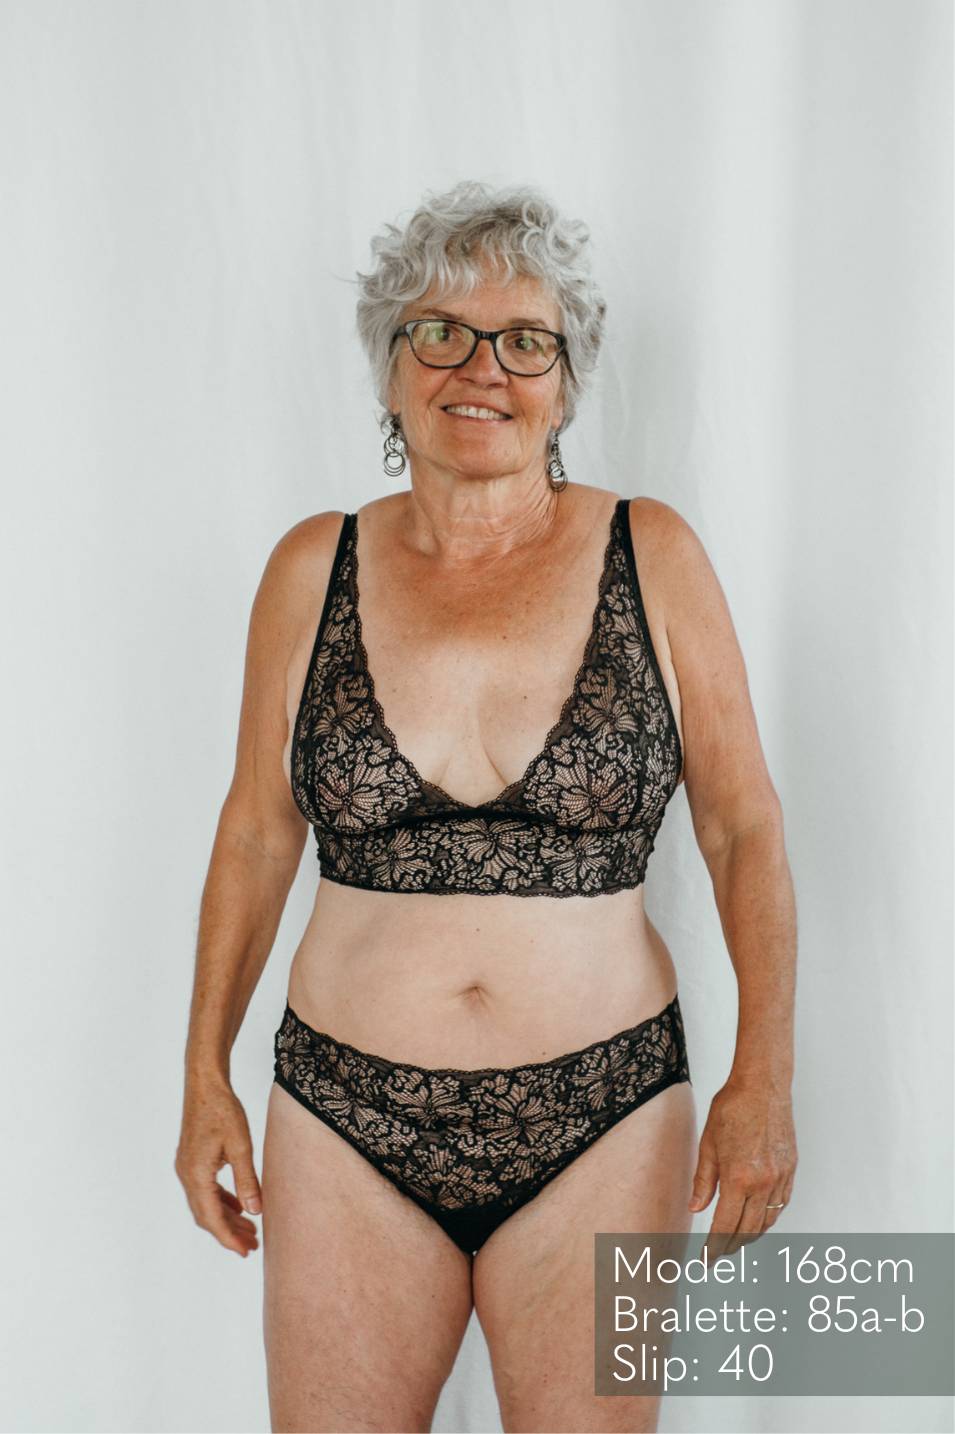 Person wears Bralette and slip Belle from thoughts of september in black.